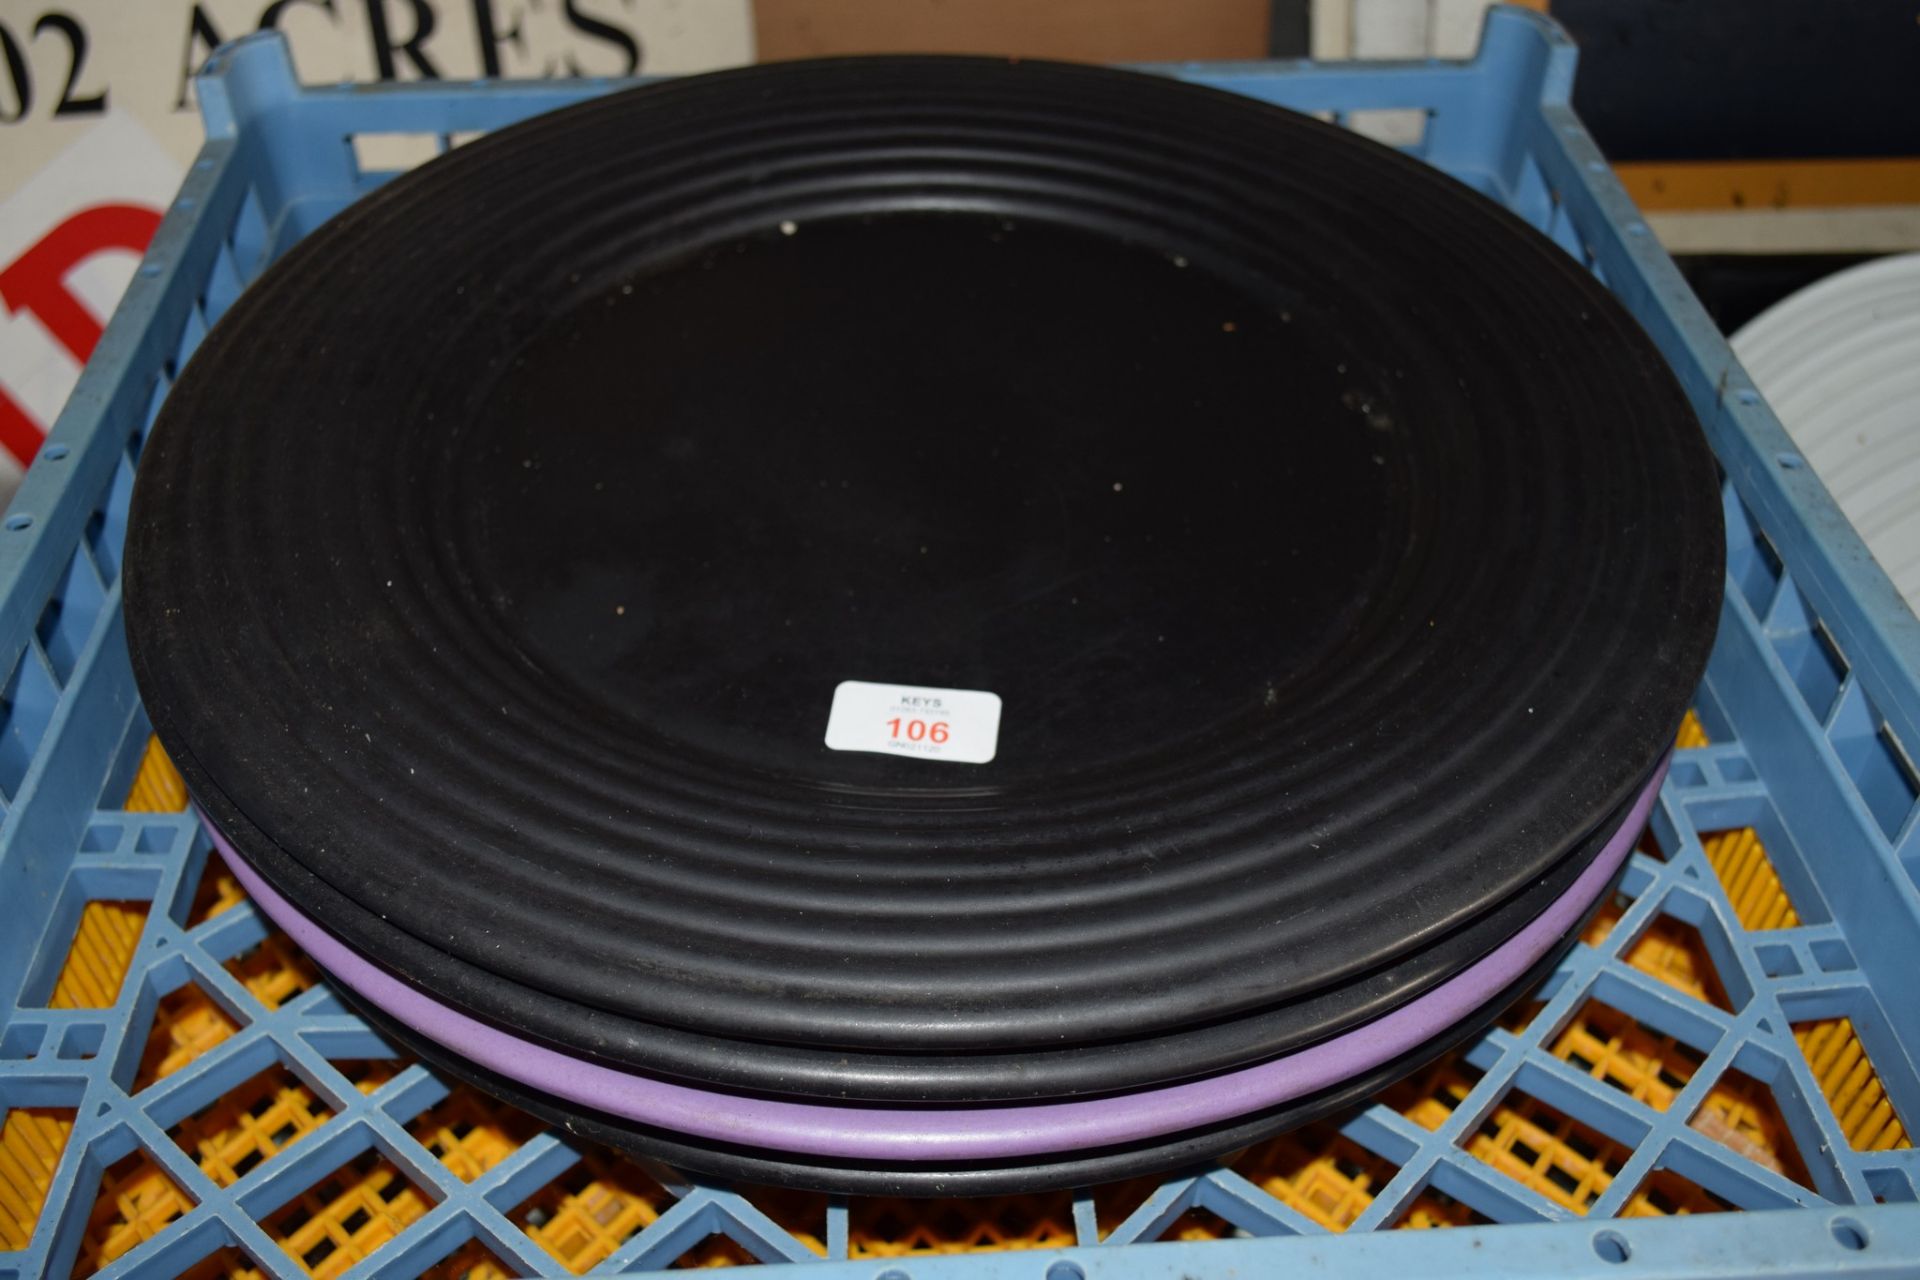 Four large circular Serving Boards.